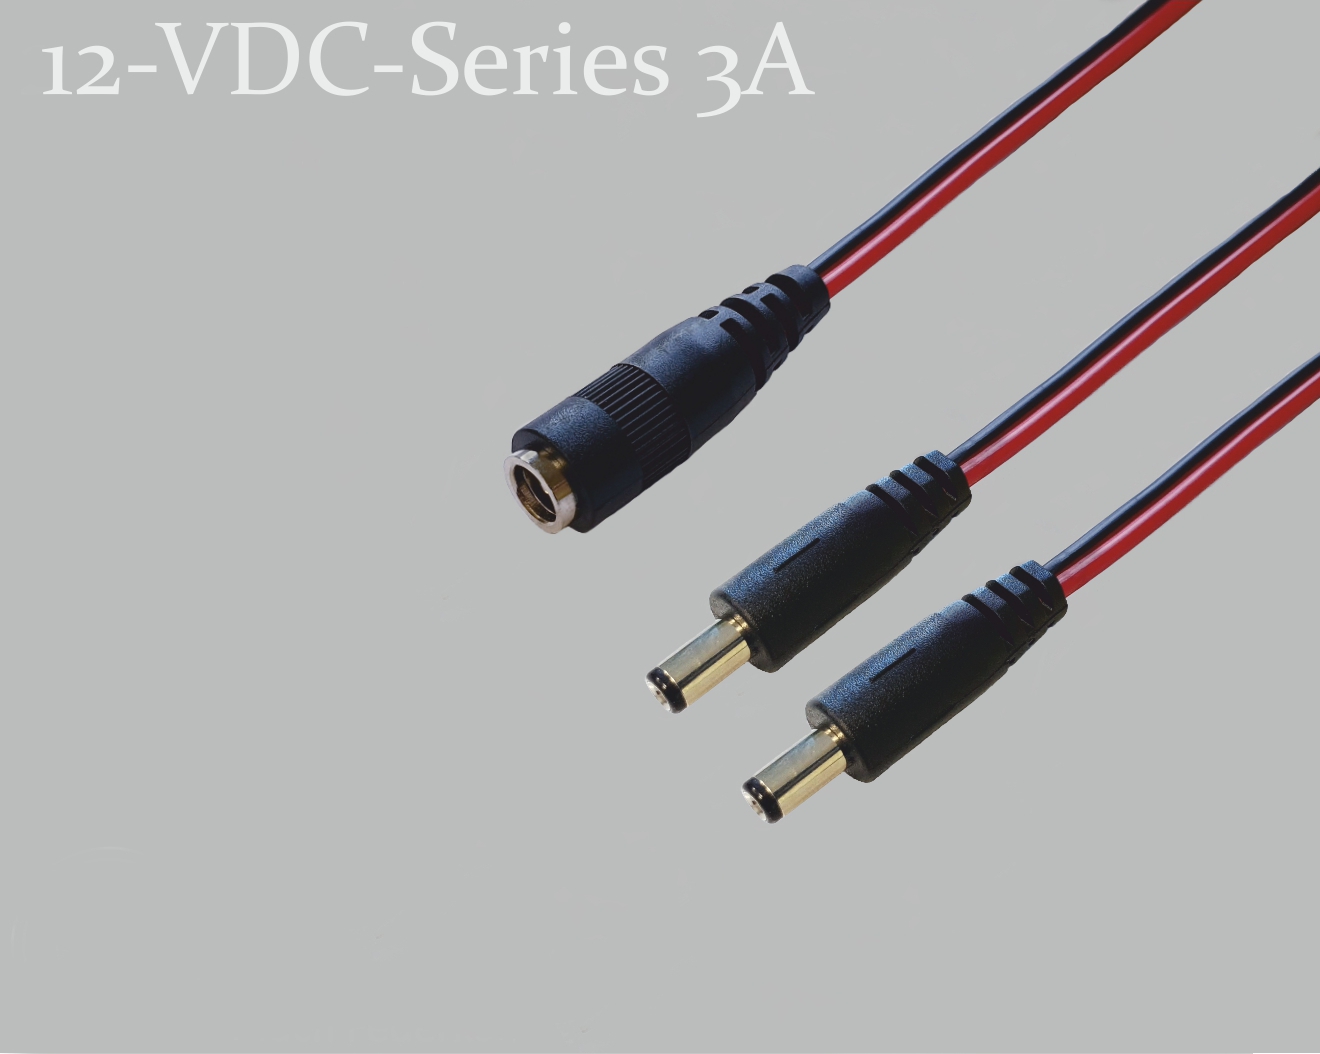 12-VDC-Series 3A, DC distributor 1x DC coupling to 2x DC plug with spring contact, 2.5x5.5mm, flat cable 2x0.4mm², red/black, 0.3m